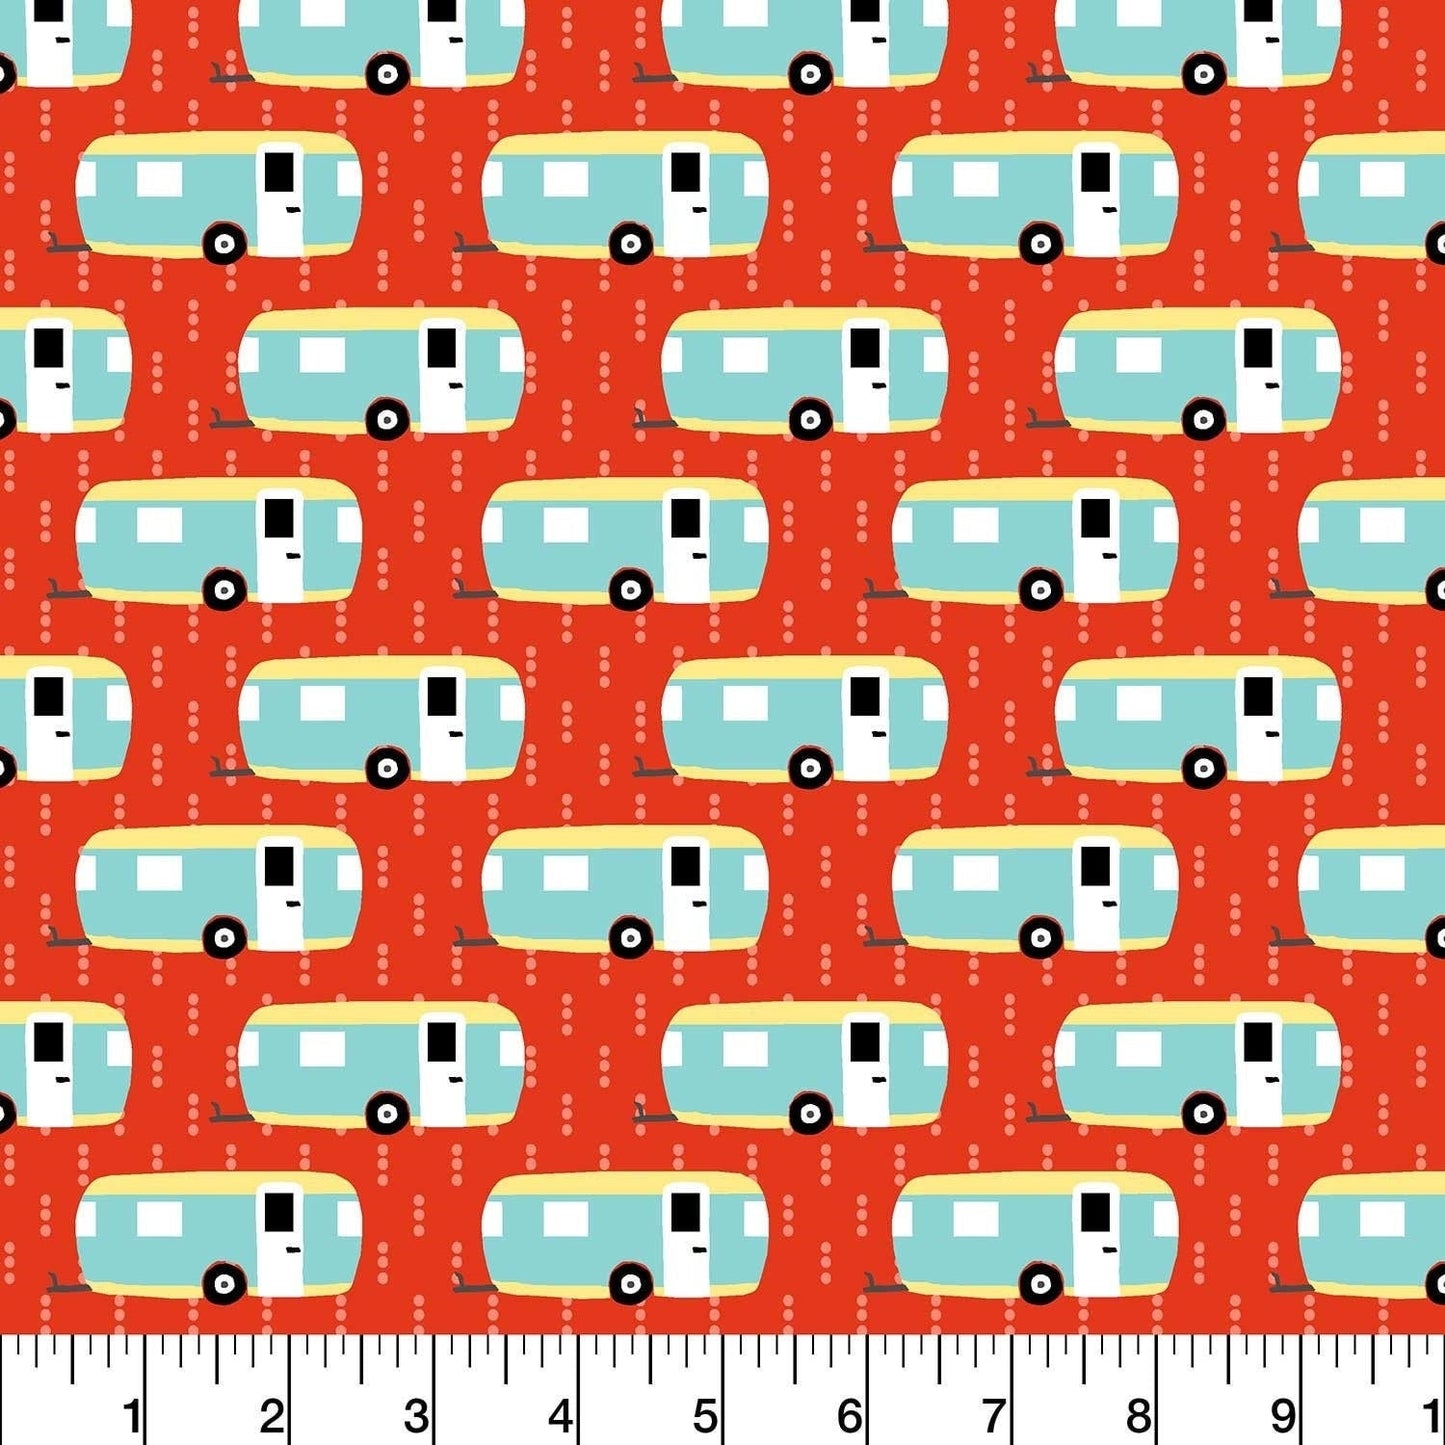 Roughin&#39; Campers Red - Wide Width - LAMINATED Cotton Fabric - Robert Kaufman